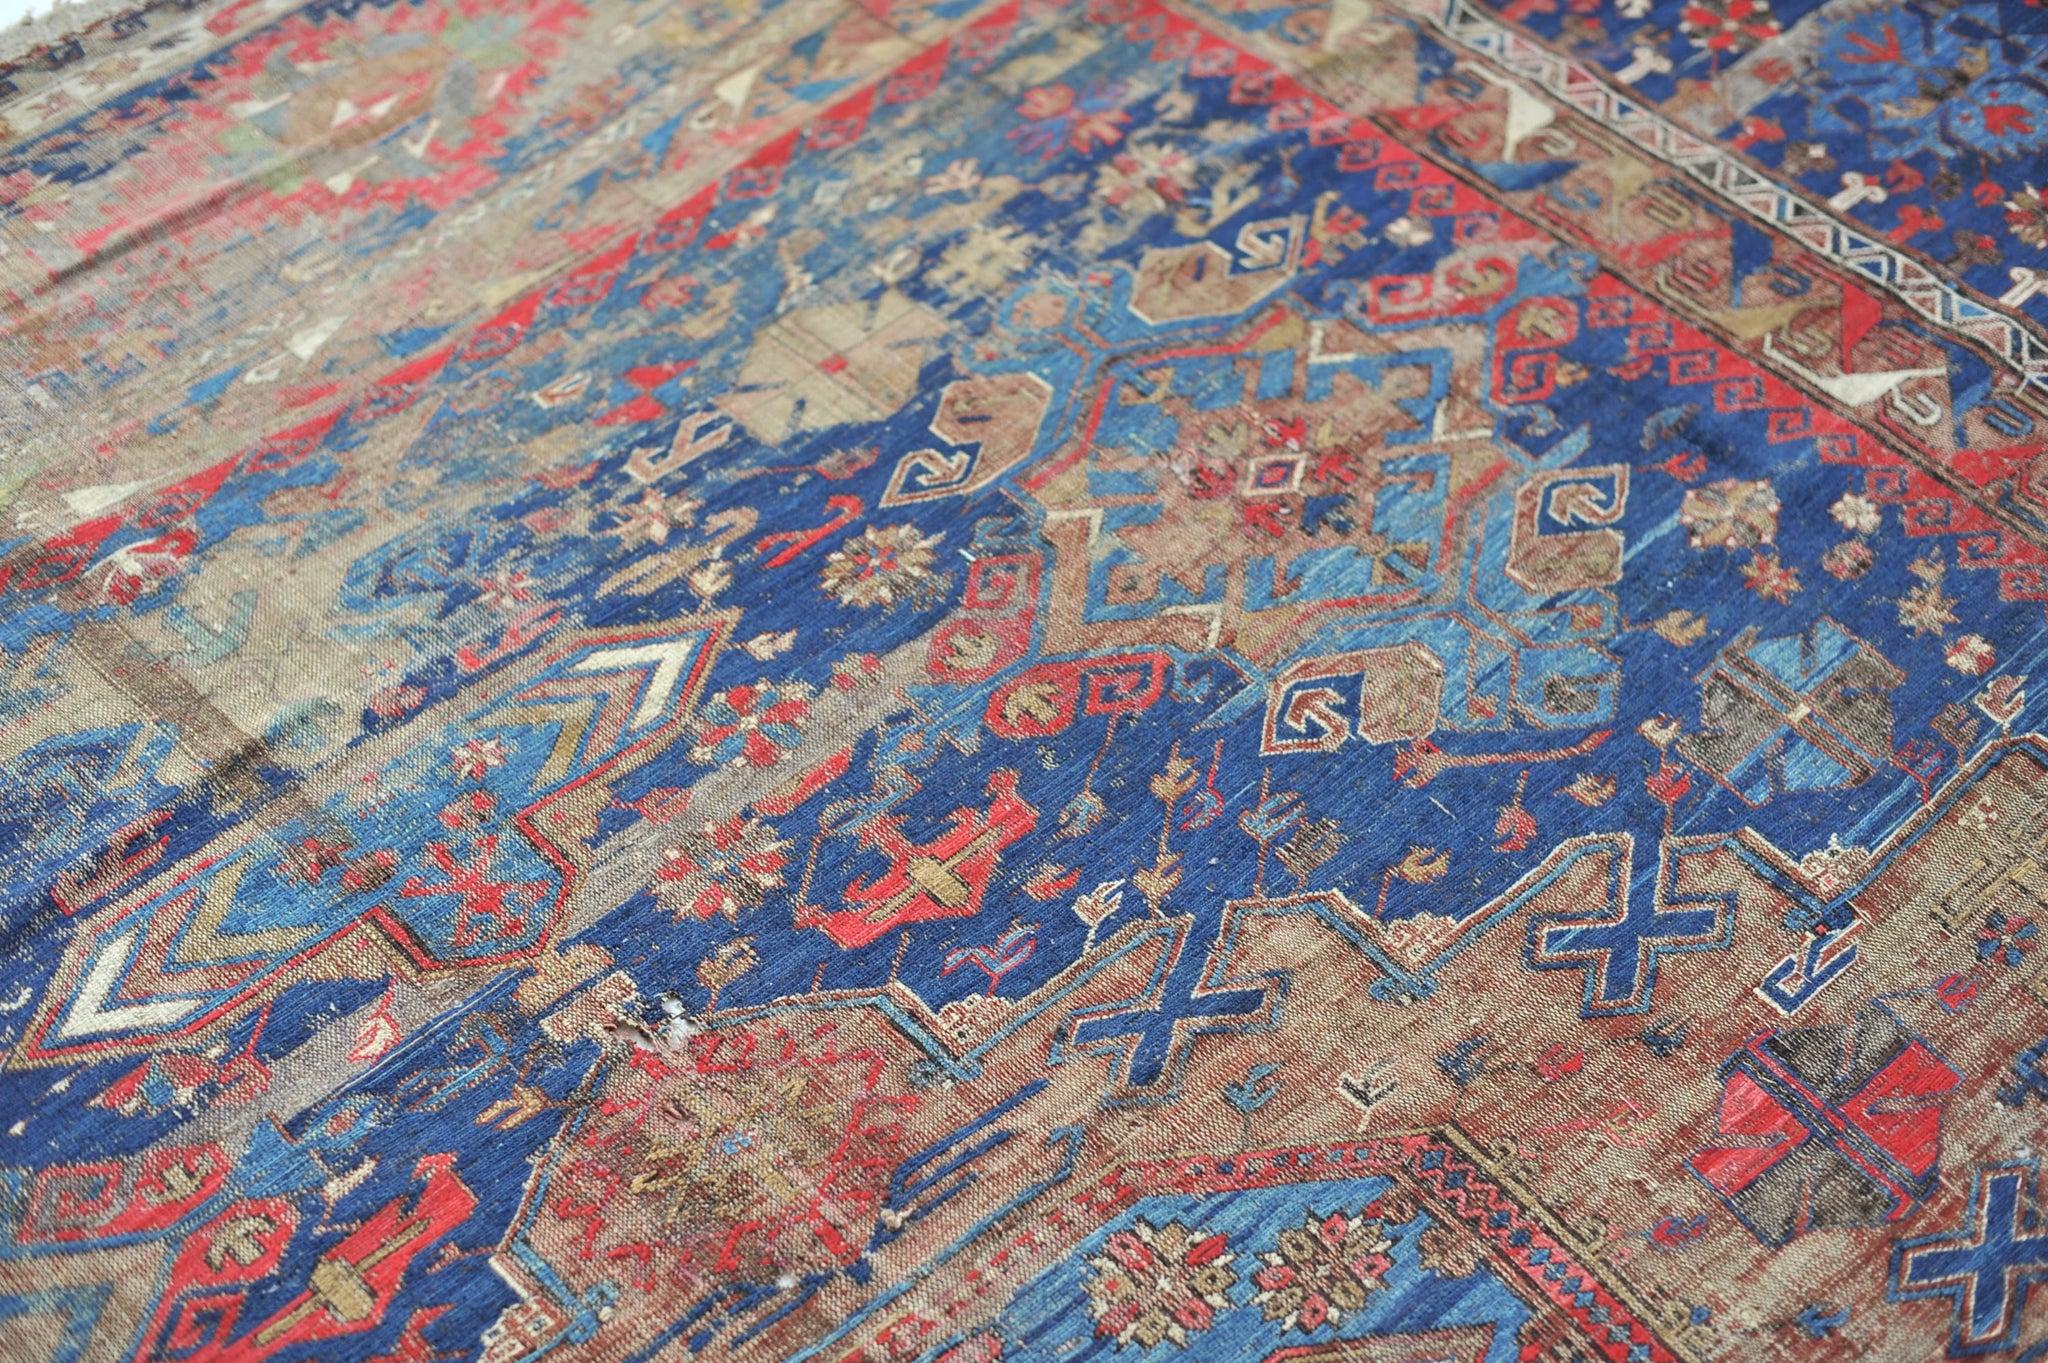 One-of-one Over-sized Palatial Antique Sumac Textile Rug, c.1910 For Sale 5